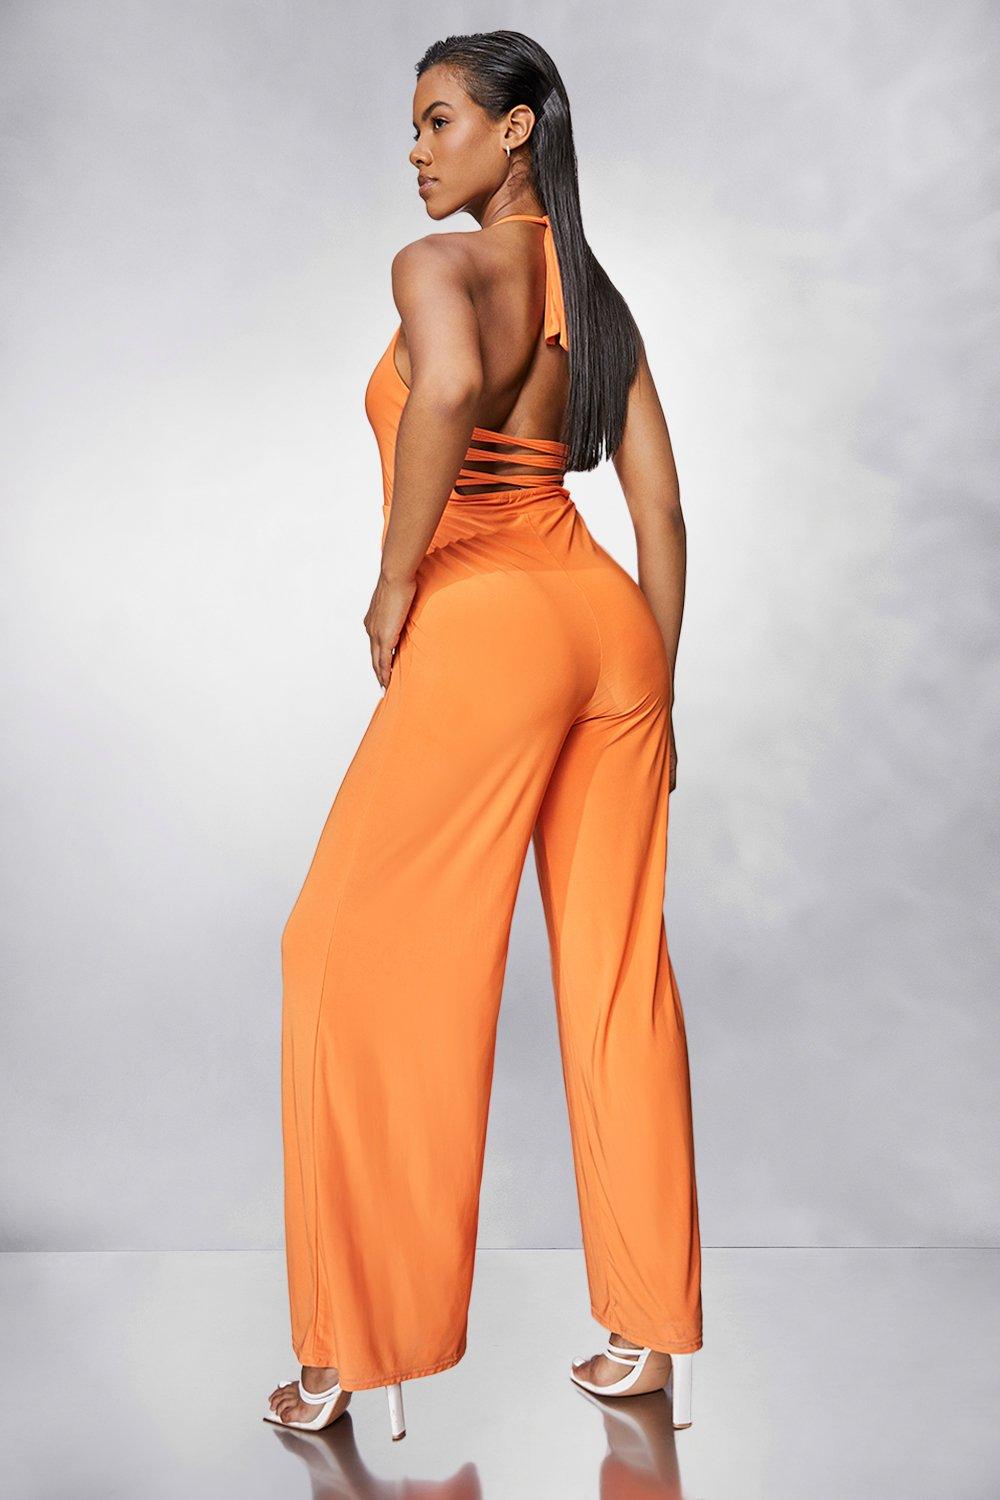 Summer Glow Cut Out Halter Neck Jumpsuit in Caramel